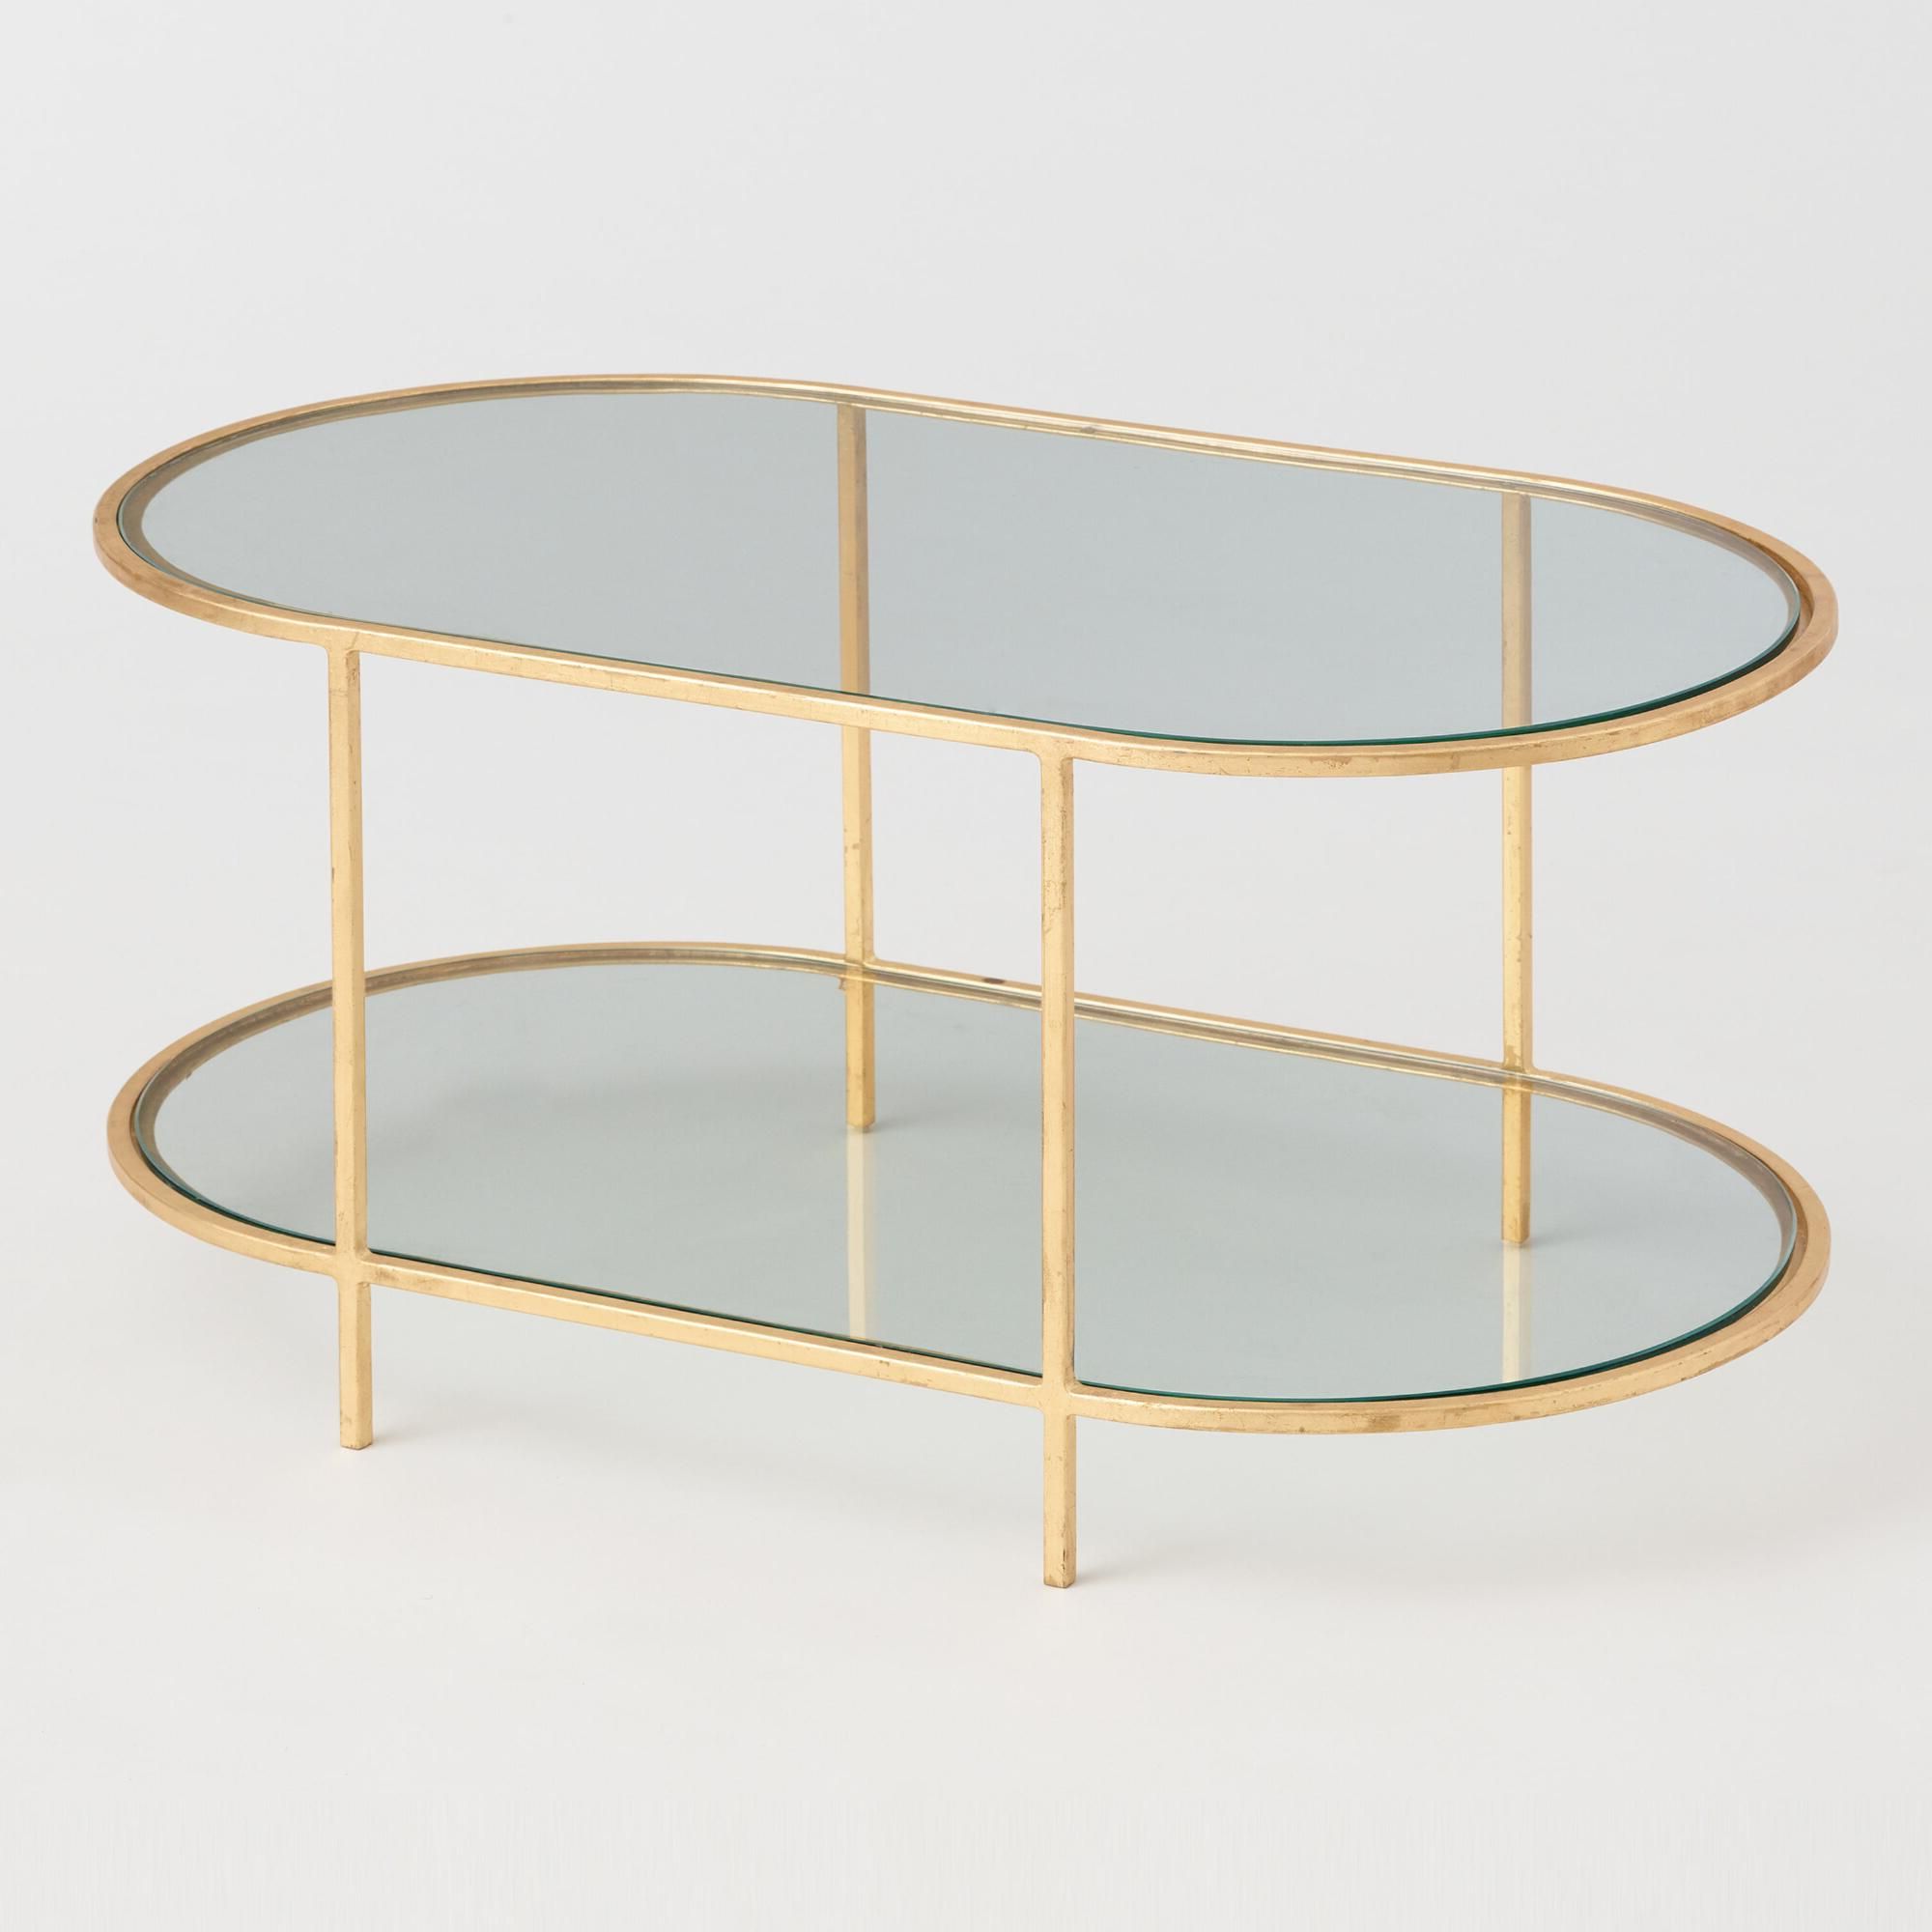 Leaf Round Coffee Tables In Well Known Glass Gold Leaf Coffee Table Oval – Katie Considers (View 4 of 20)